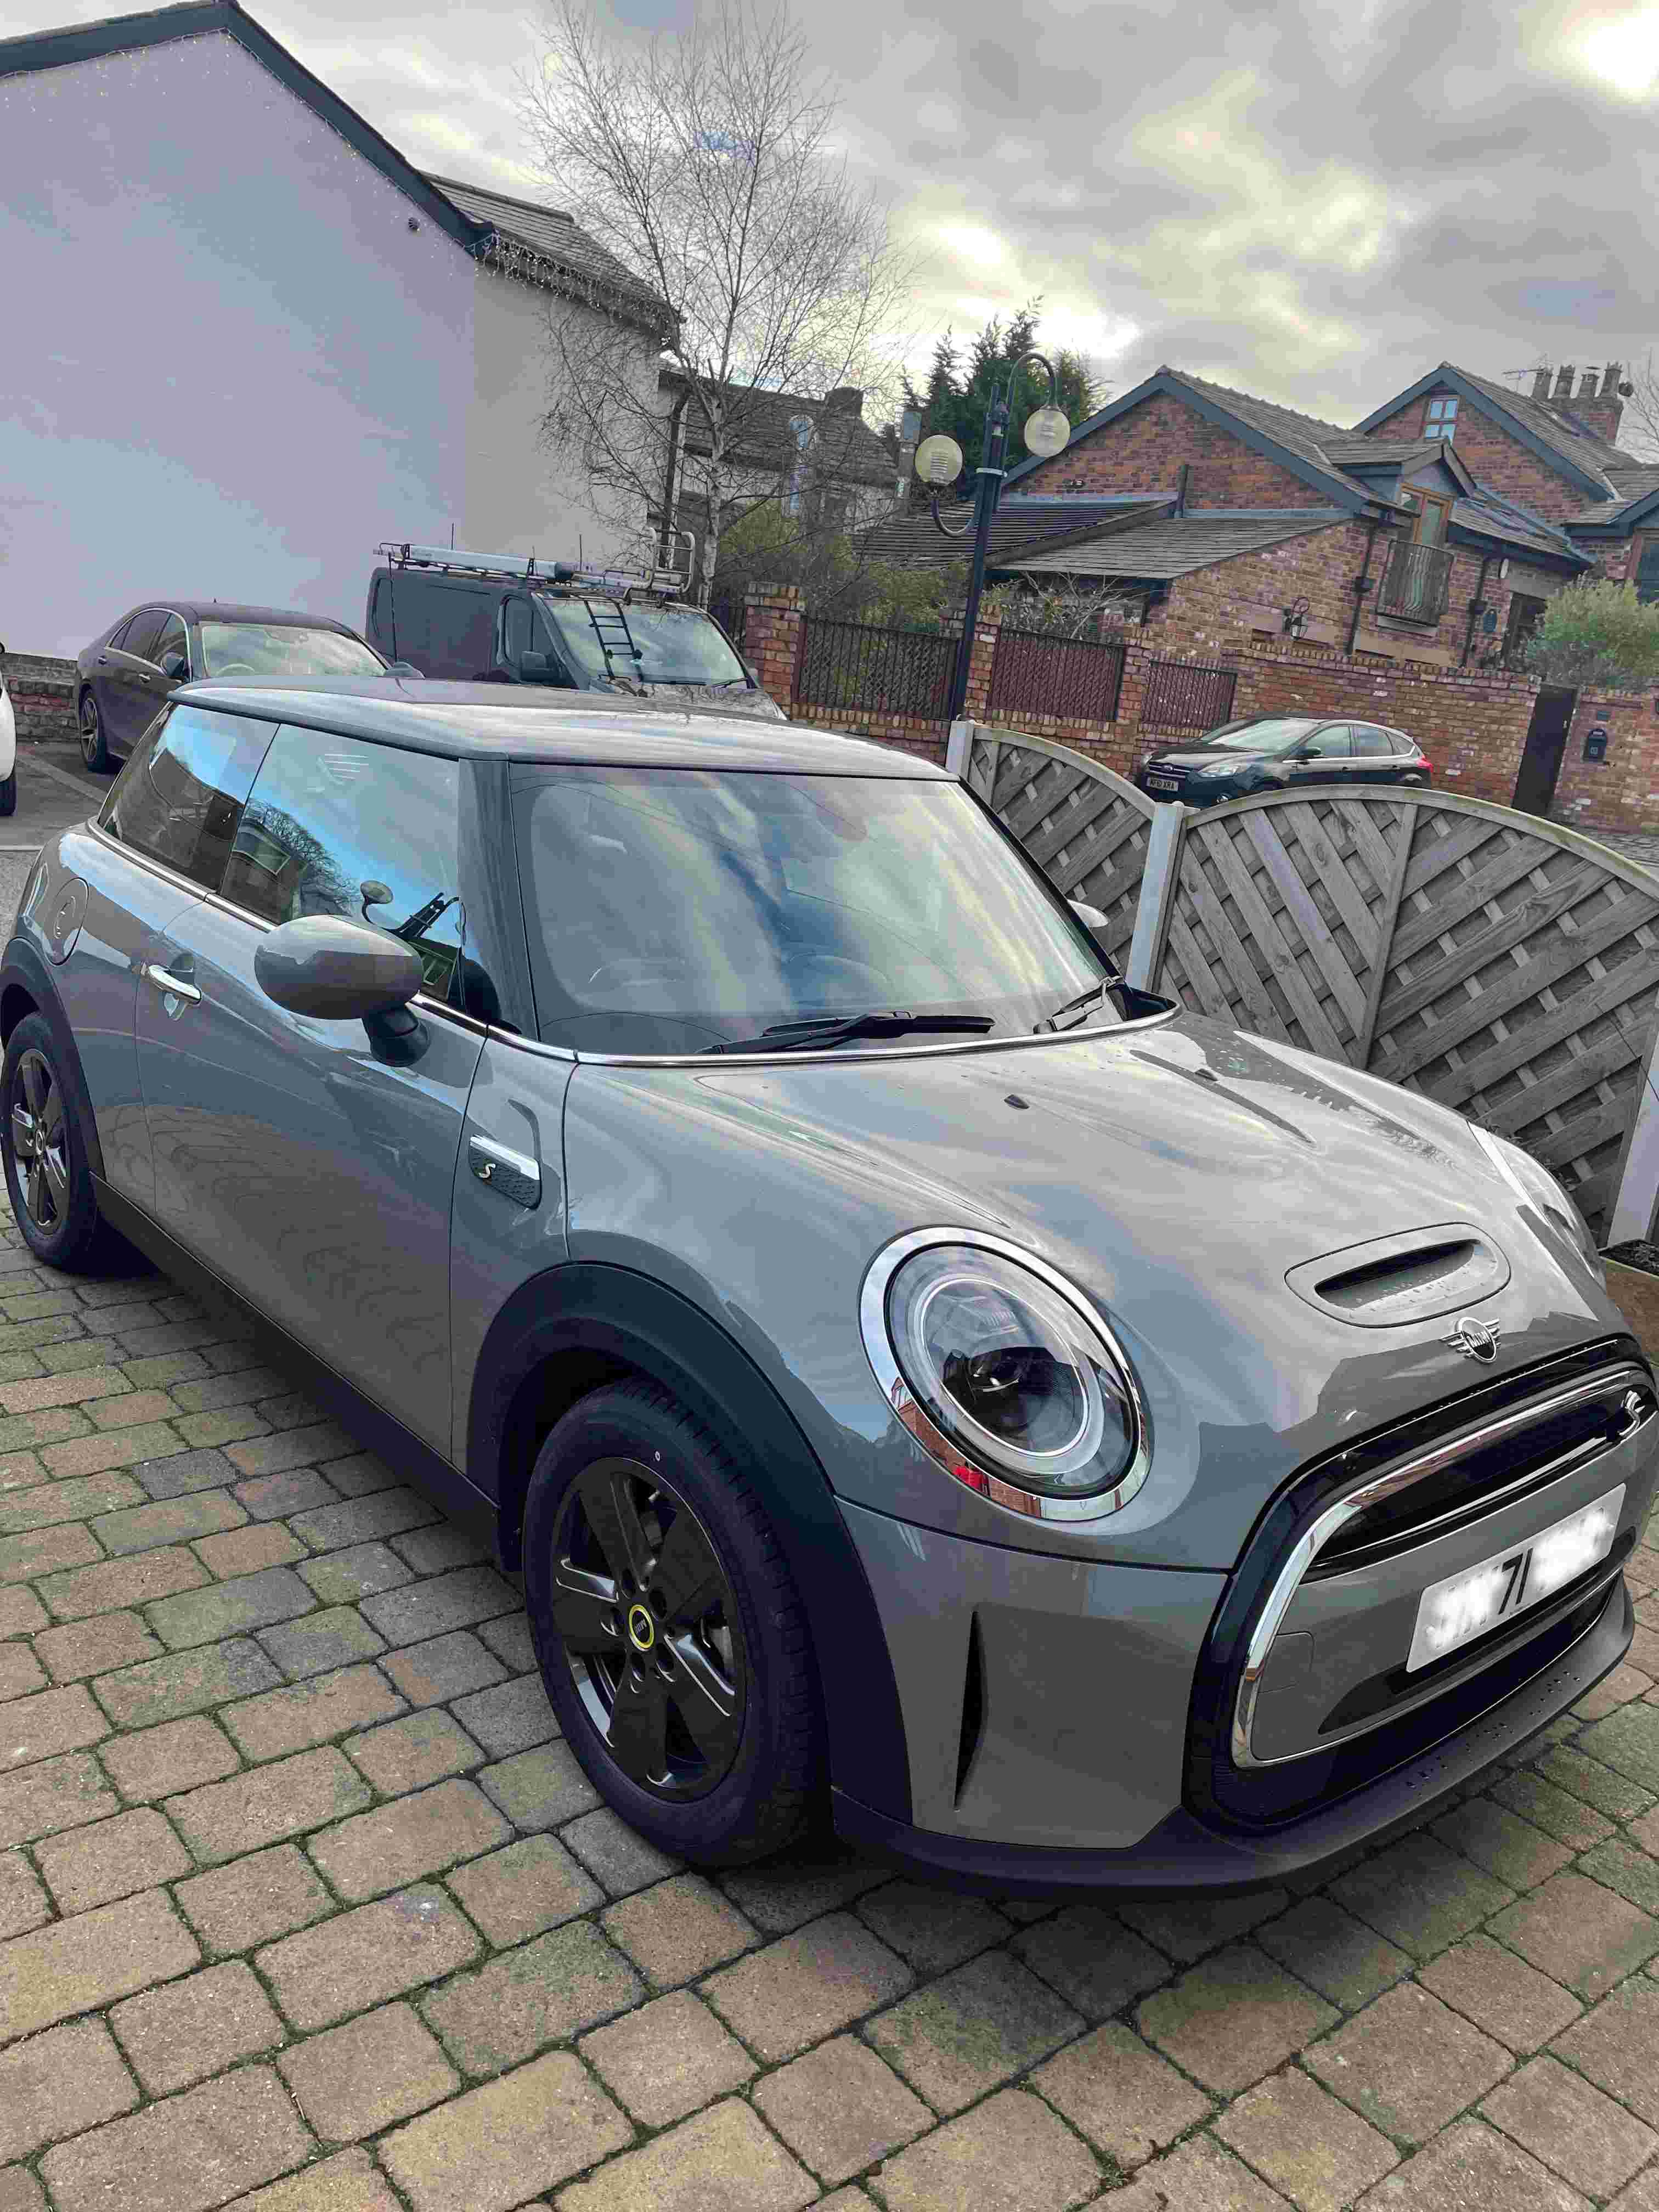 Mini-Electric-Hatchback-135kW-Cooper-S-Level-1-33kWh-3Dr-Auto-Electric-Car-Leasing-Advice